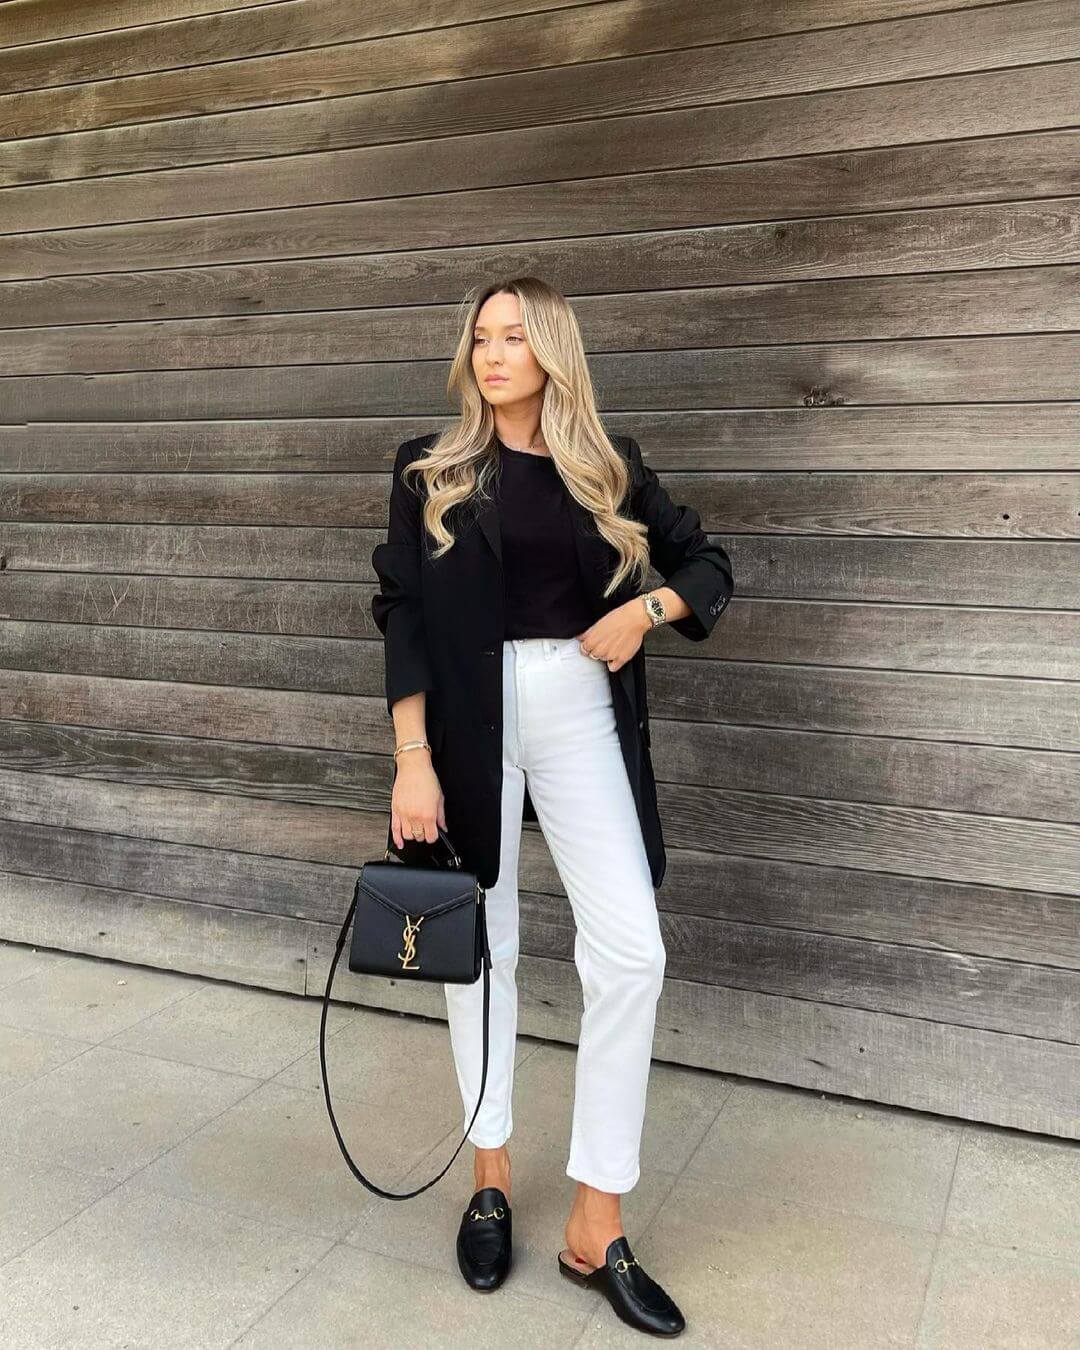 This Business Casual Outfit Is Our Latest Obsession